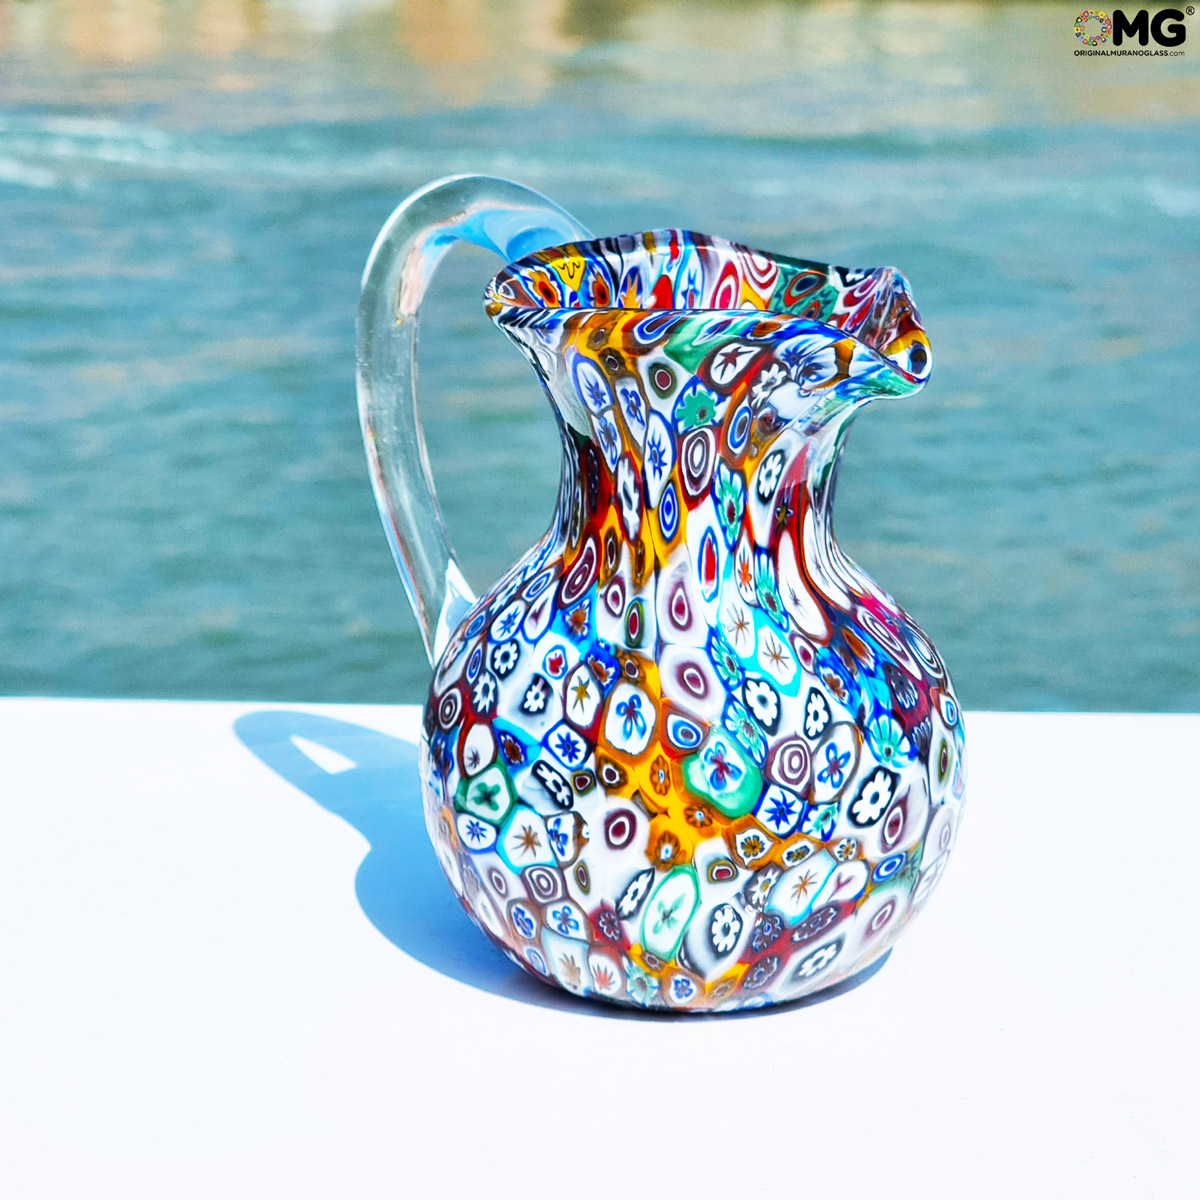 Pitcher Glass Mix Colors Glass Murano